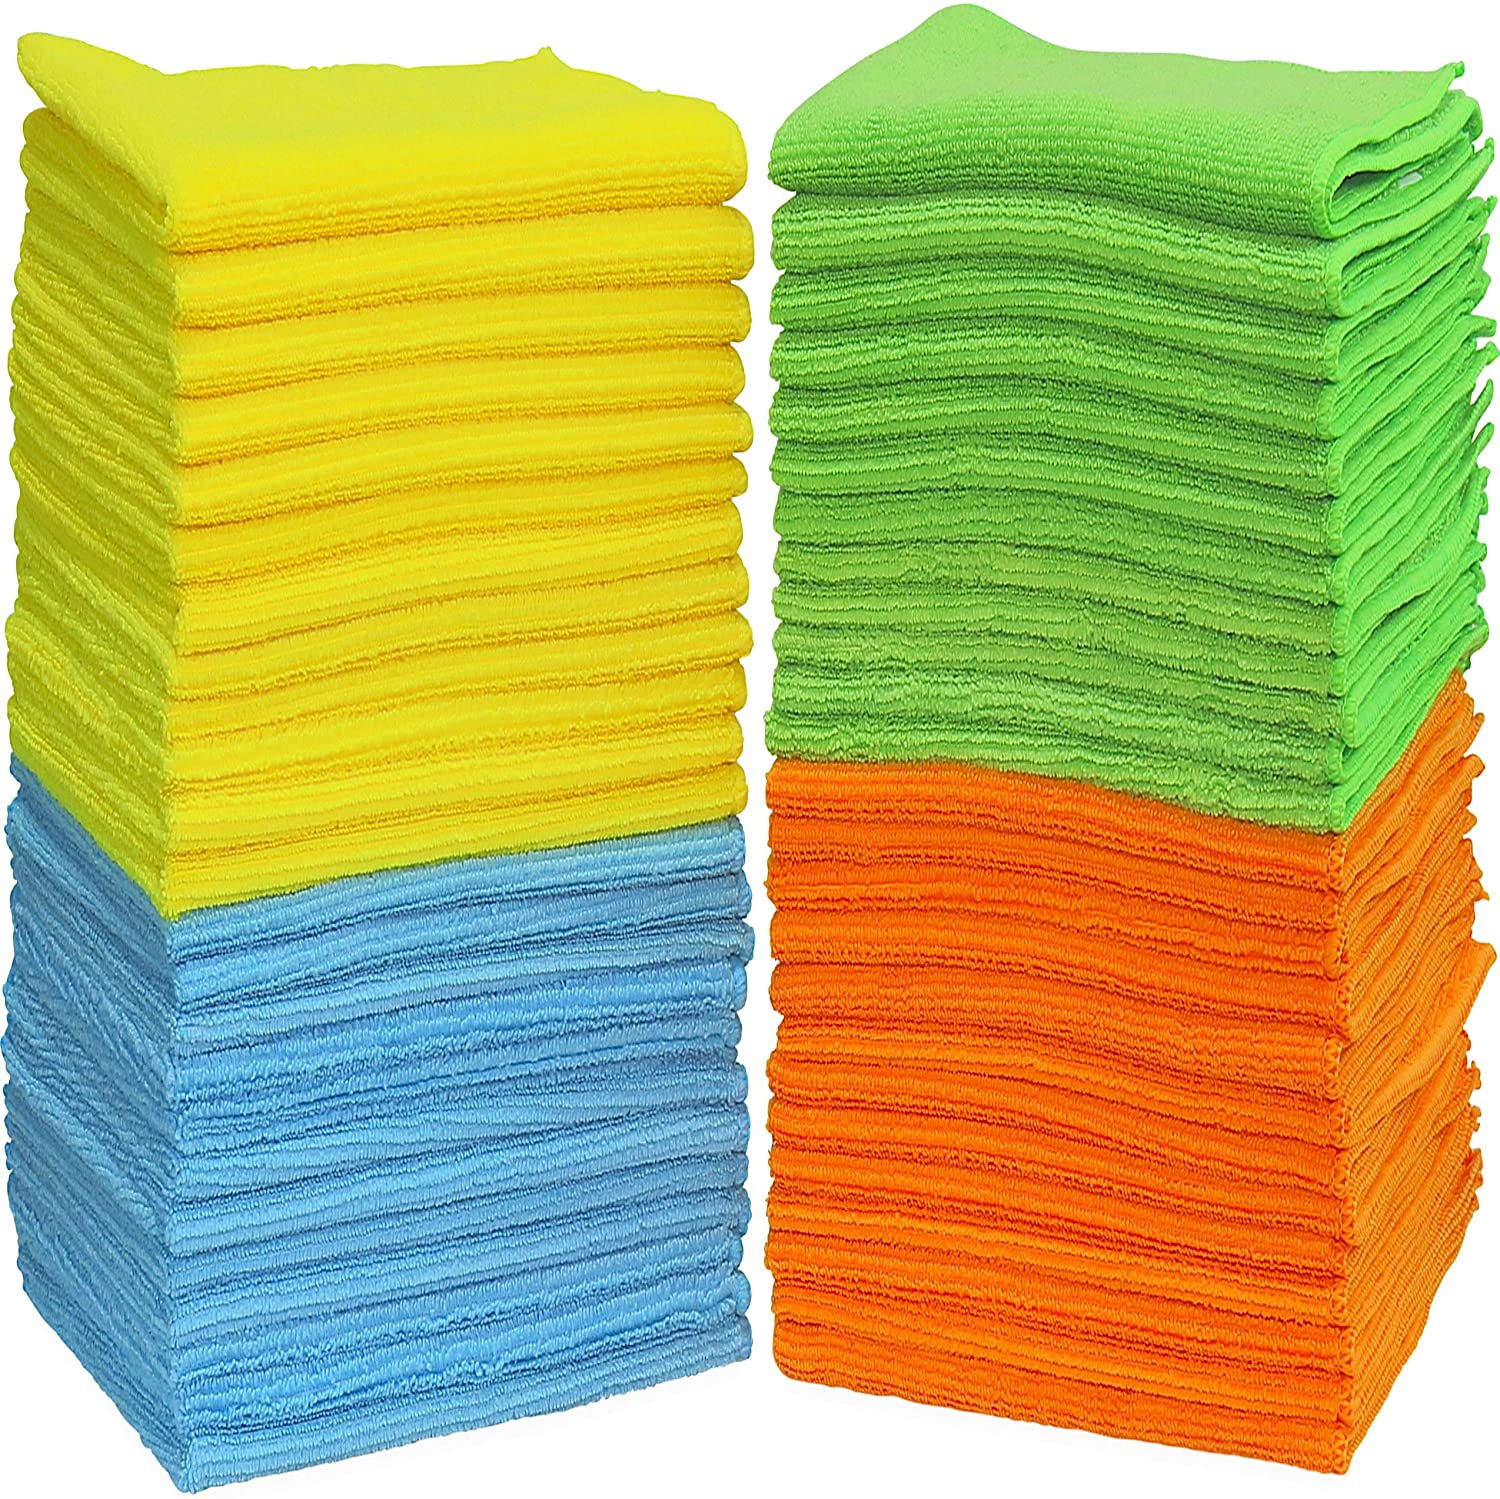 SimpleHouseware Non-Abrasive Microfiber Cleaning Cloths, 50-Pack